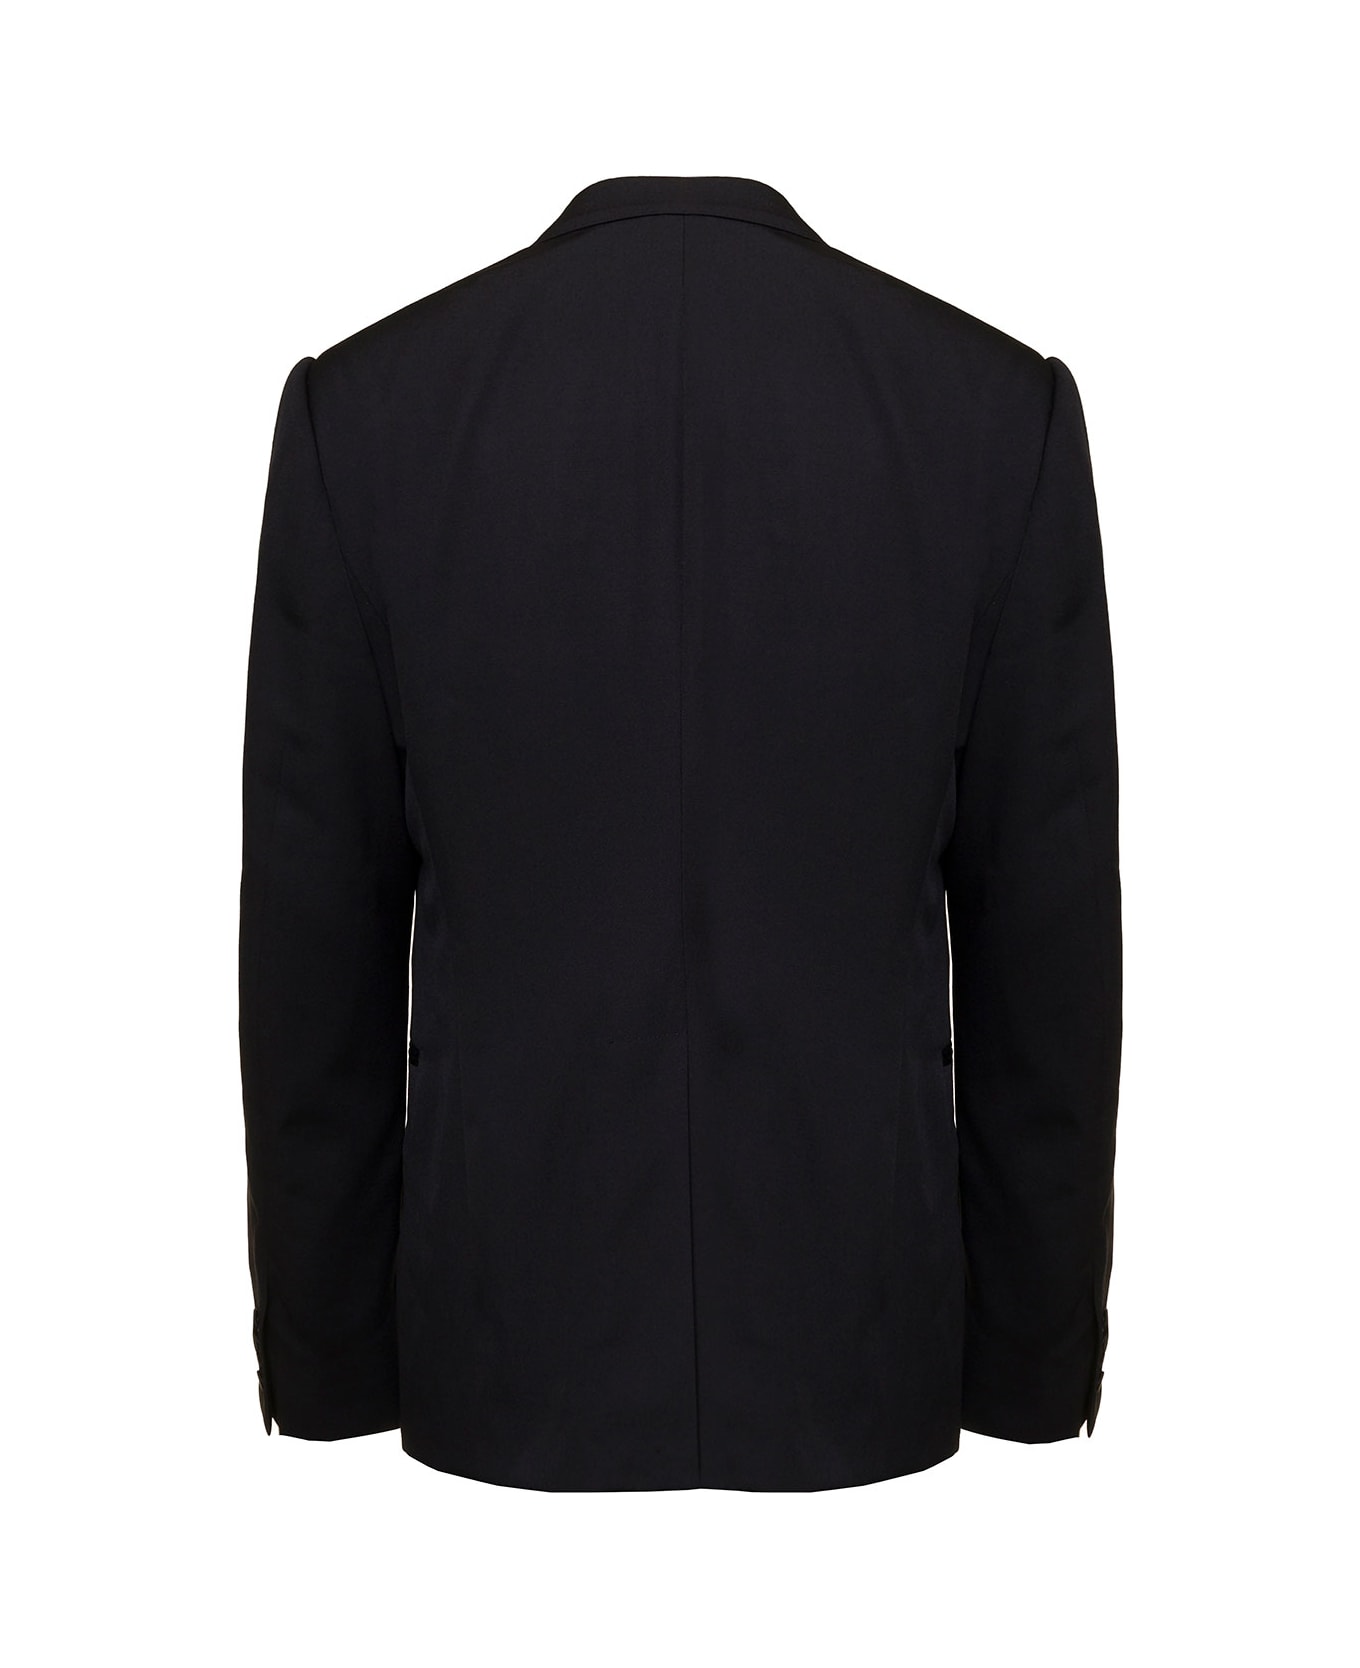 Alexander McQueen Black Single-breasted Jacket With Notched Revers In Wool Man - Black